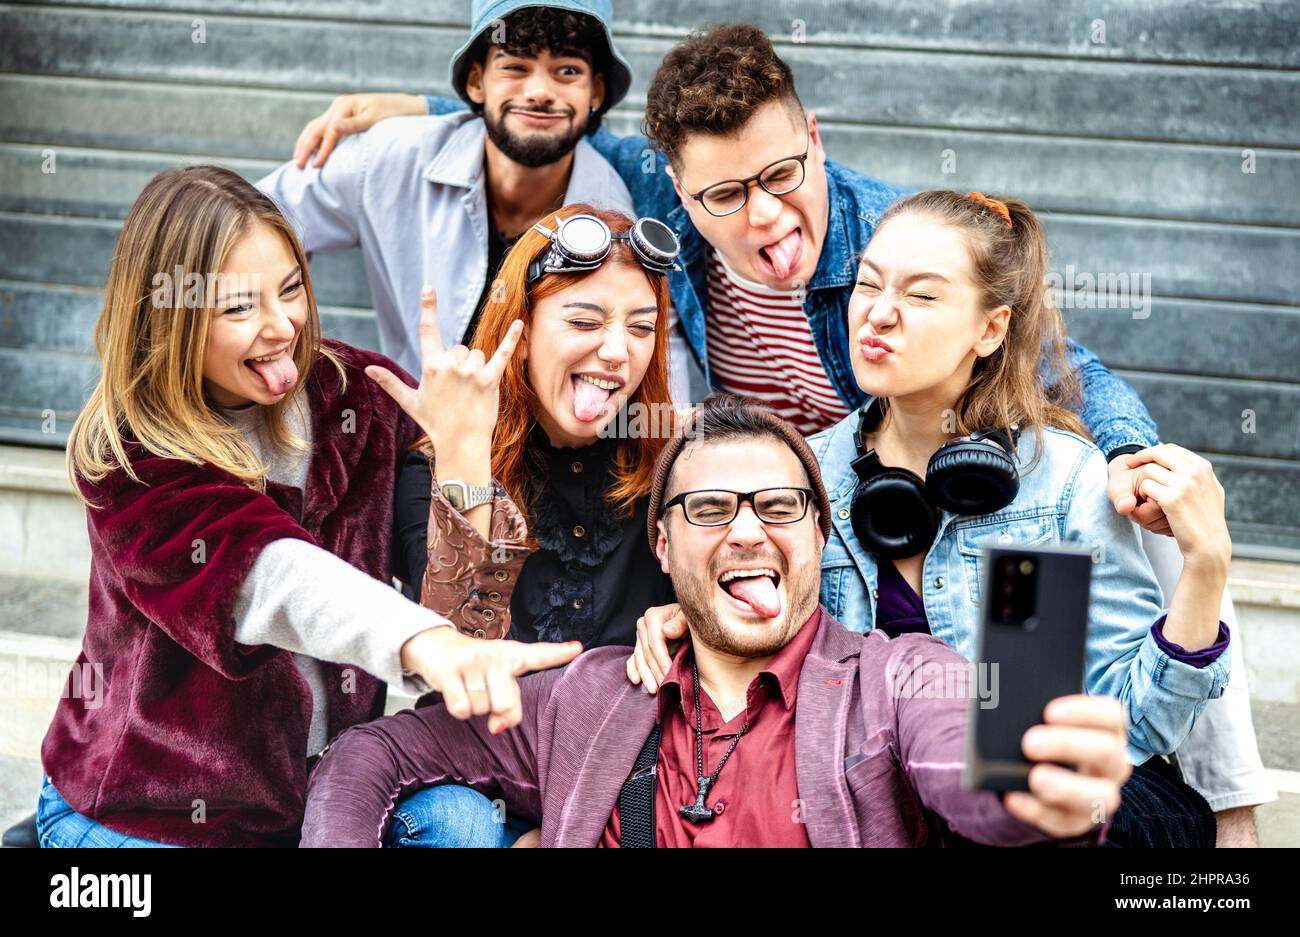 Multicultural best friends taking selfie out side at urban location - Happy millenial life style concept with young people students having fun togethe Stock Photo